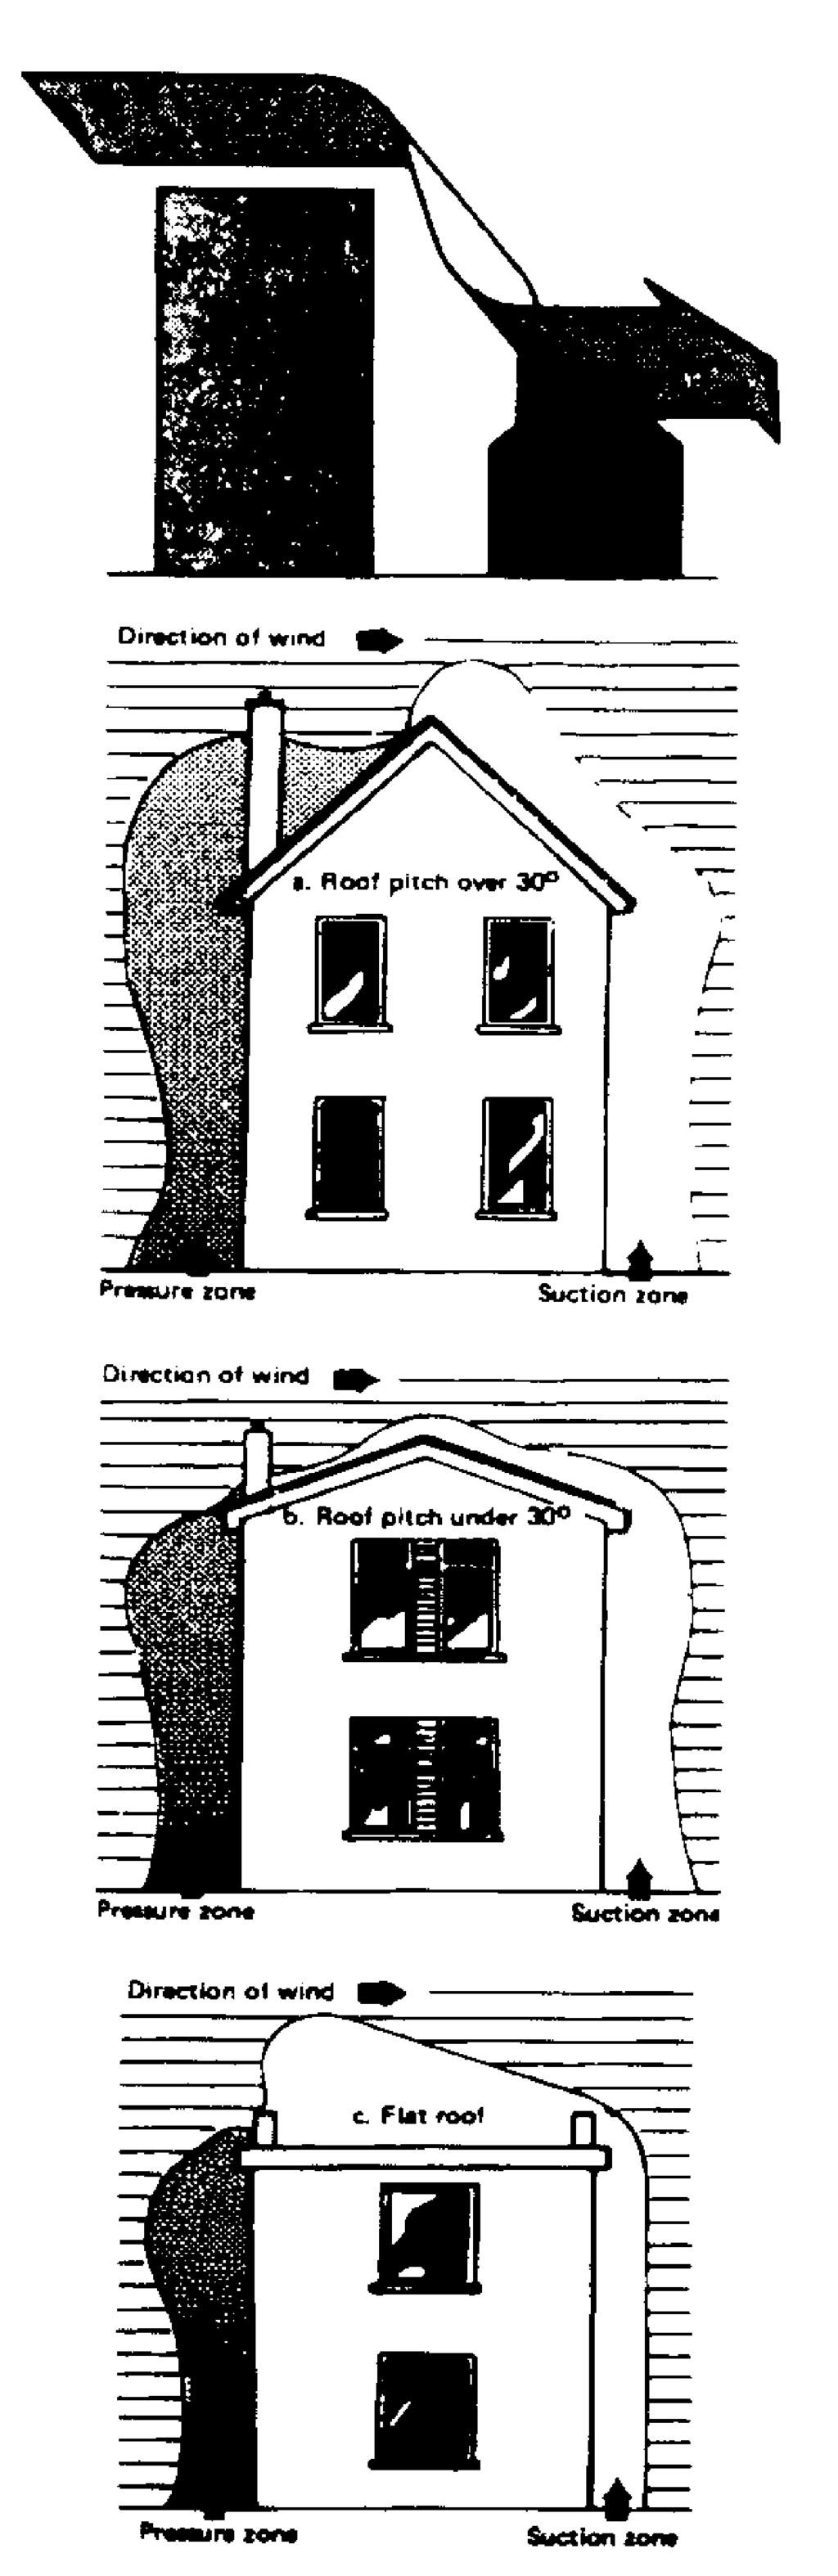 Fig.10 The effective free area of any vent should be ascertained before installation. The effect of any grills should be allowed for when determining the effective free area of any vent.